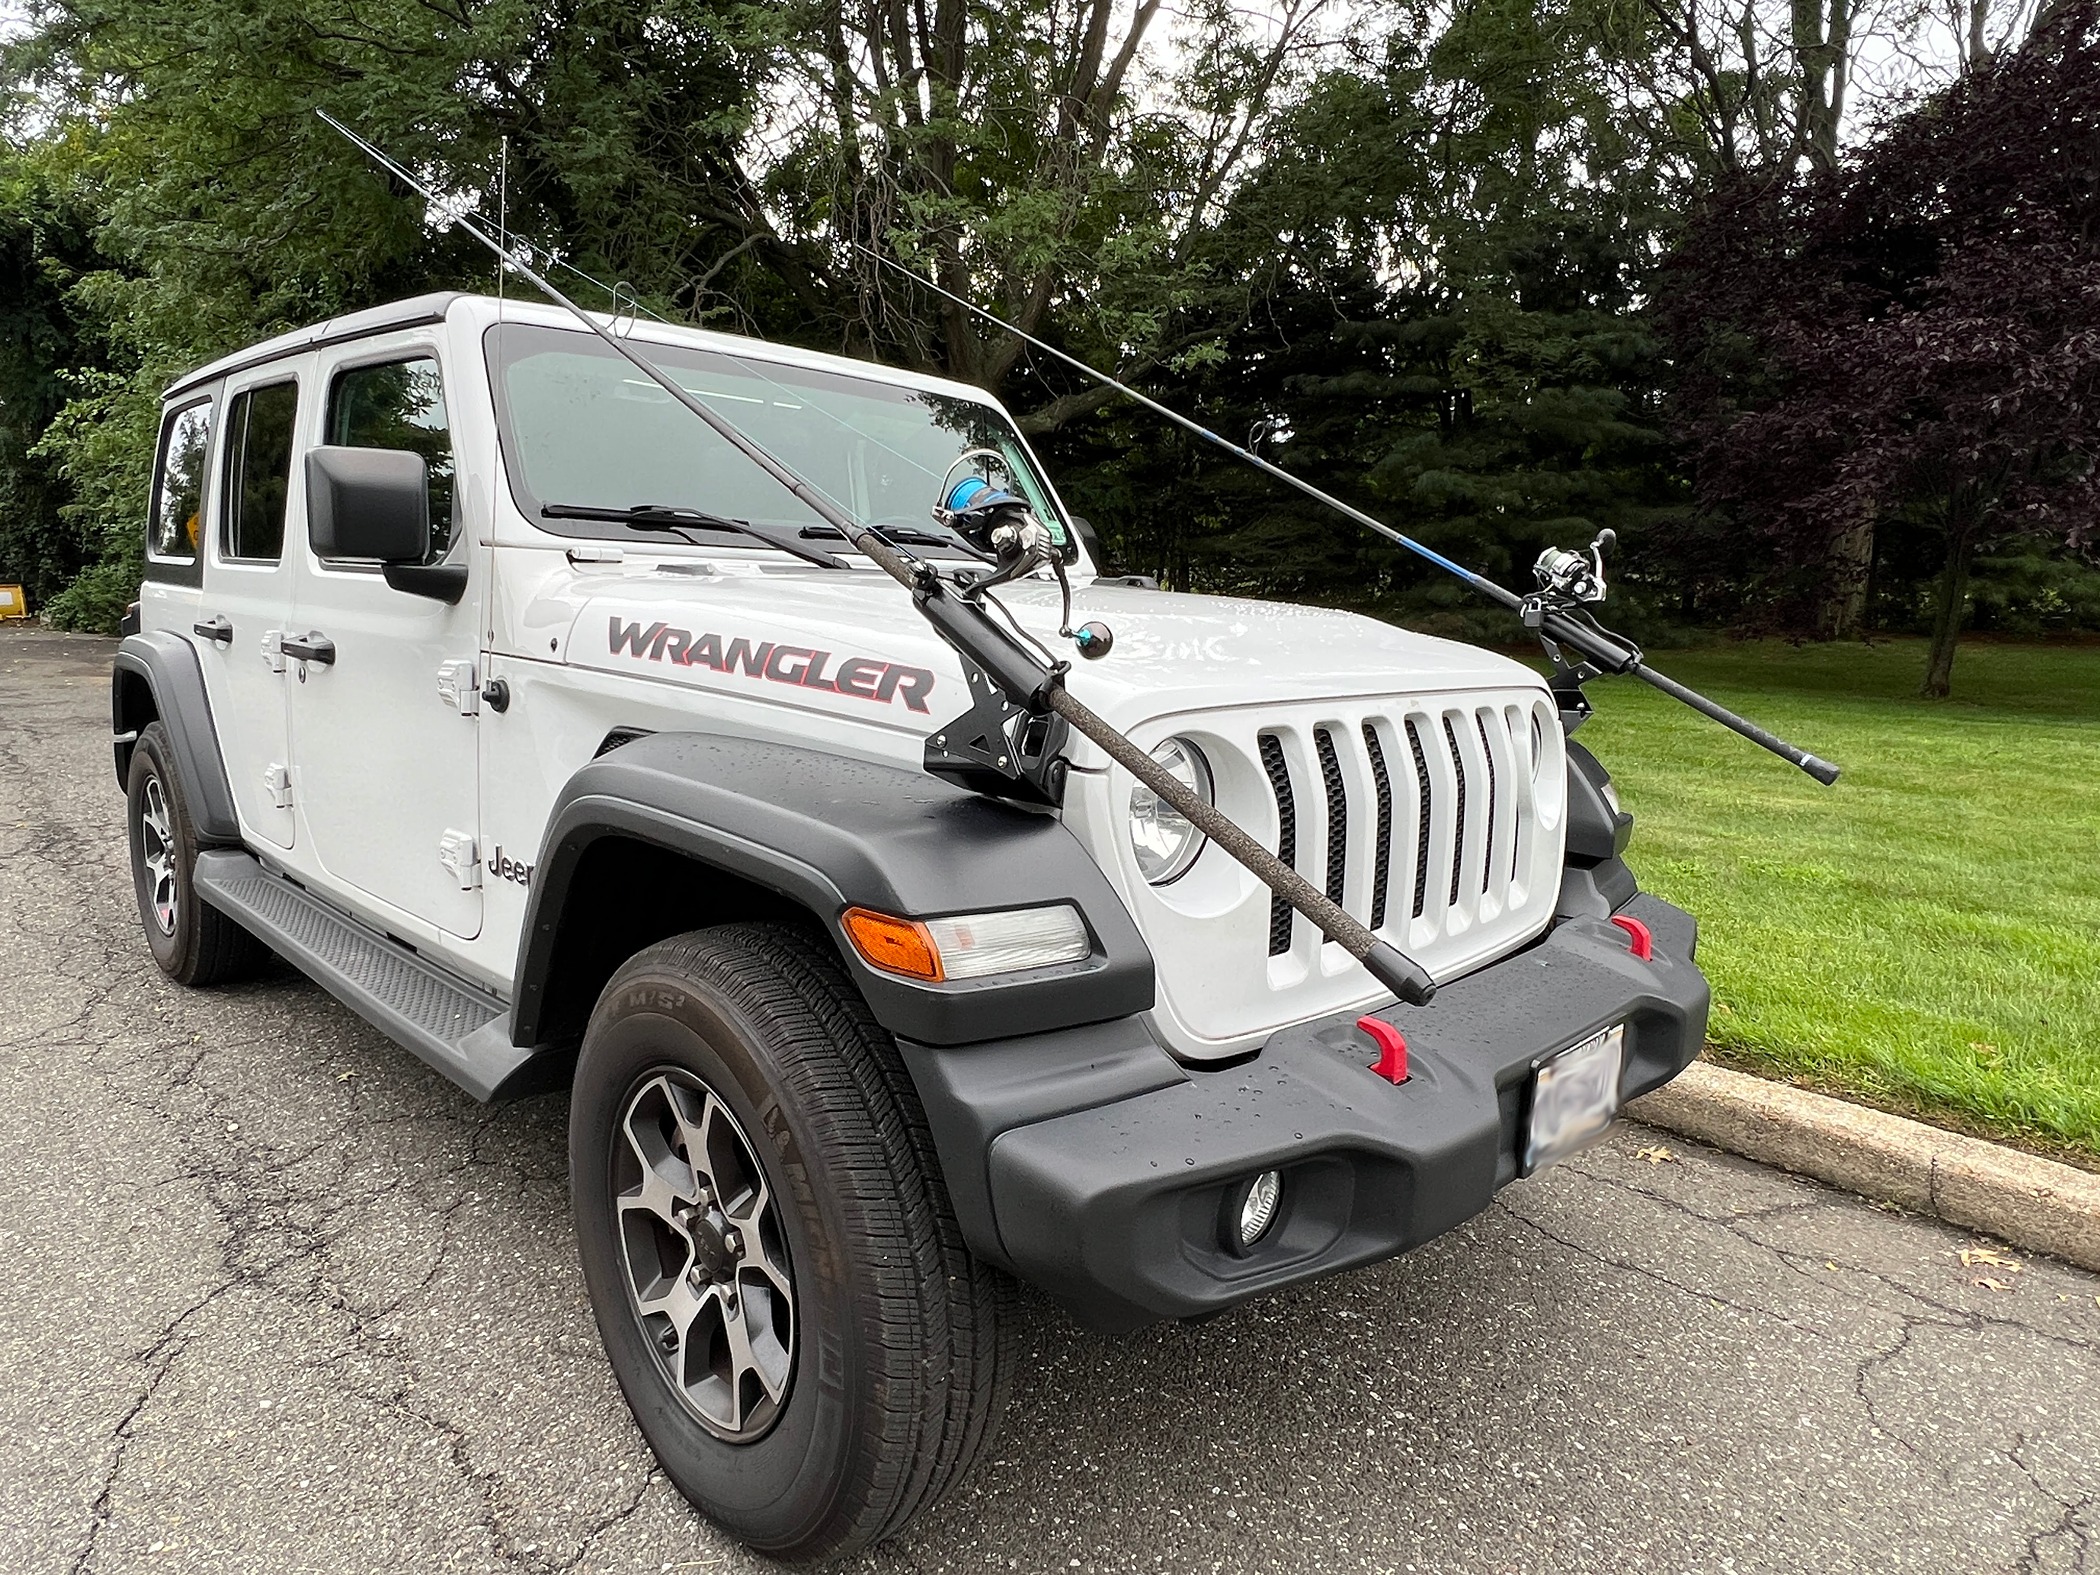 Do you go fishing with your Jeep? X-Rocket Fishing Rod Holders